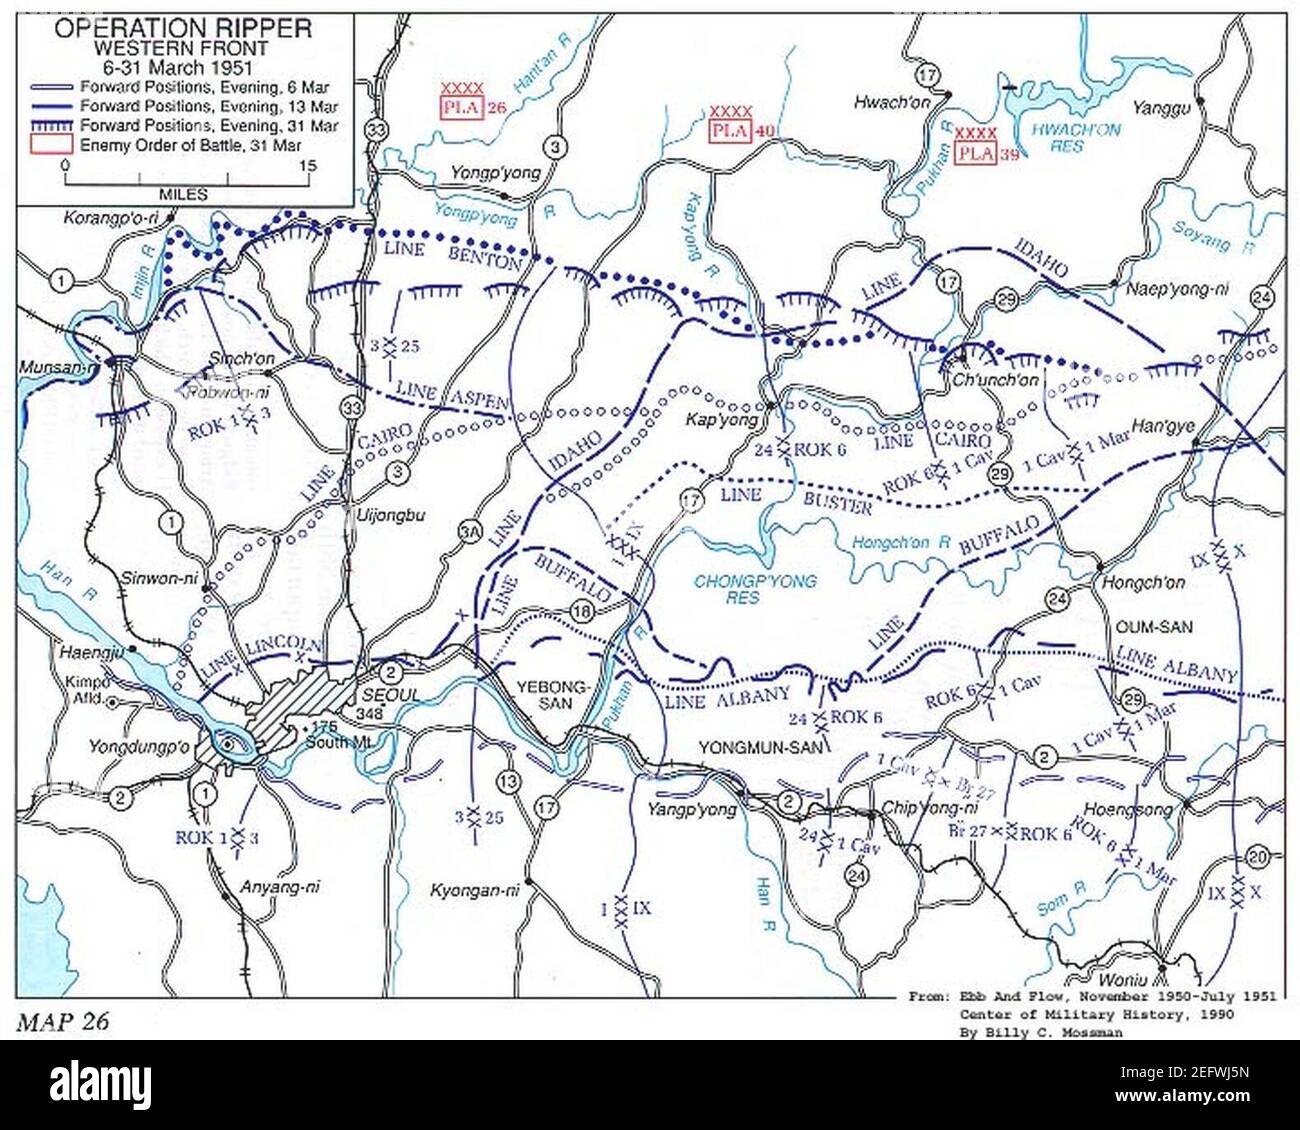 Operation Ripper western front map. Stock Photo